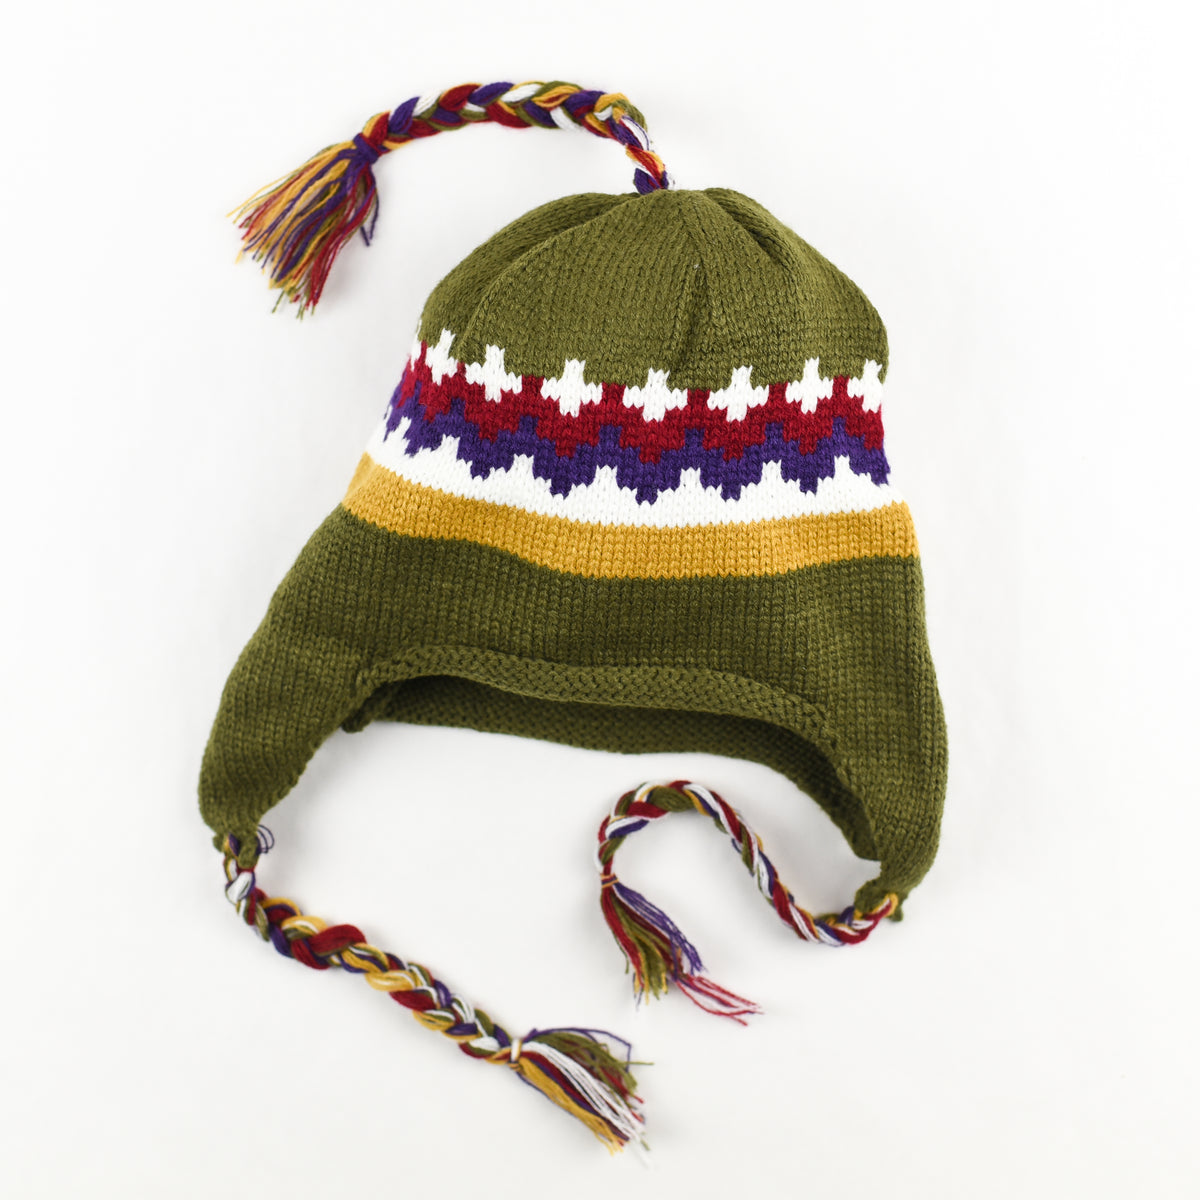 Knitted olive Animal Cracker Beanie with white, red, purple and gold design and long braided yarn on top and on earflaps